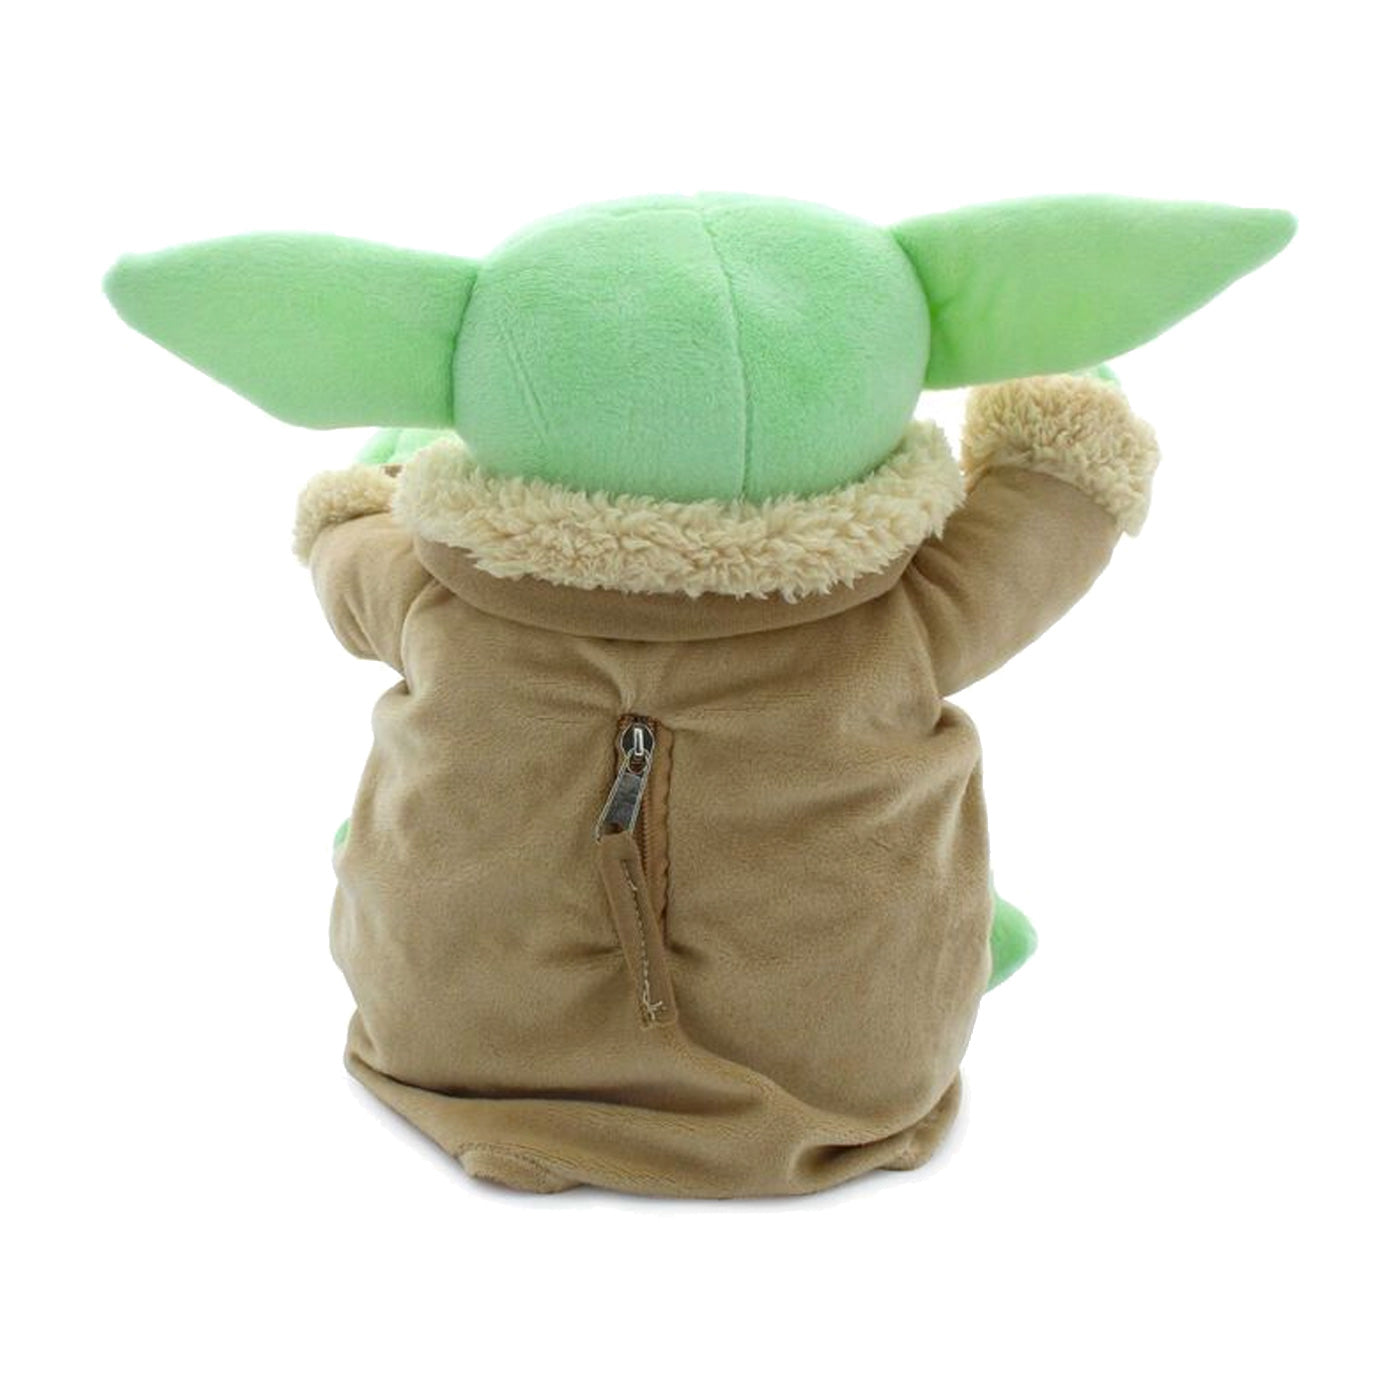 Backpack Plush The Child